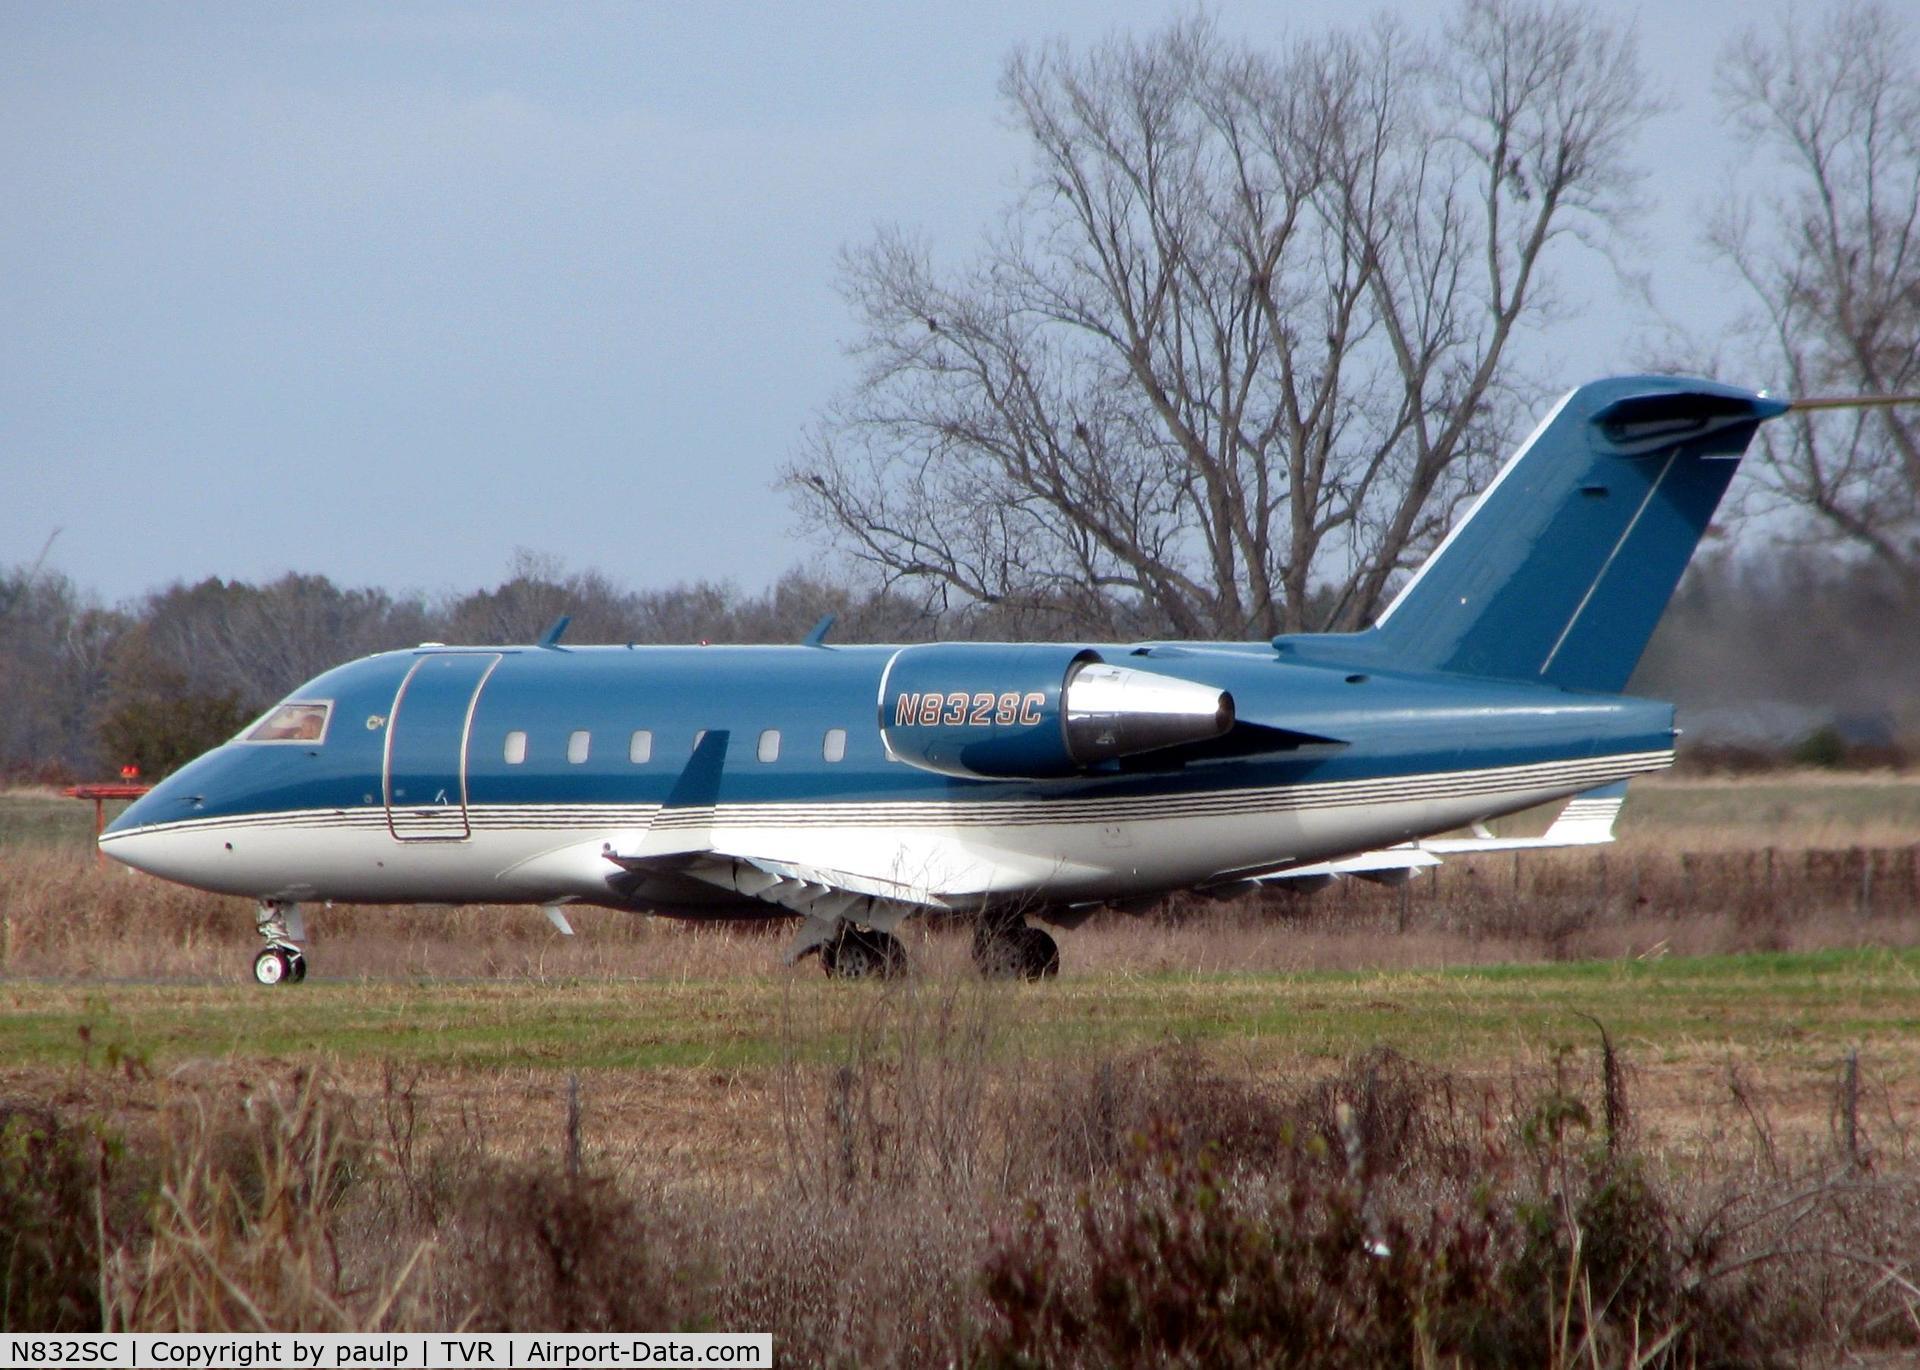 N832SC, 2000 Bombardier Challenger 604 (CL-600-2B16) C/N 5461, About to take off from the Vicksburg/Tallulah airport. Odd seeing a bizjet out in the middle of nowhere?